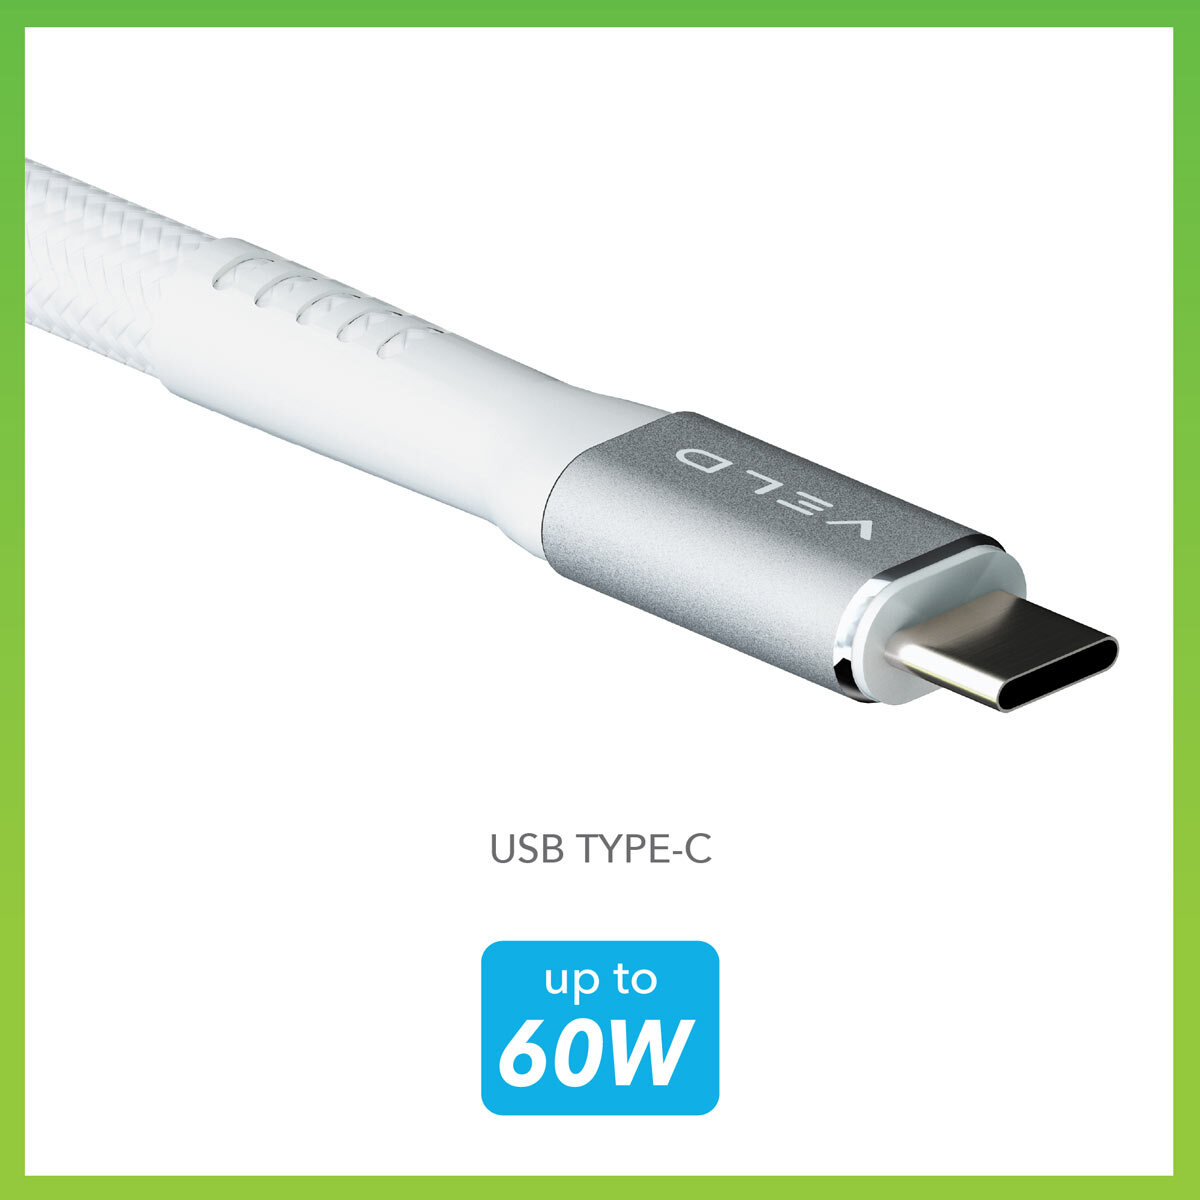 VELD Super-Fast Type-C to Type-C Cable bundle including one 18W 1m Cable and two 60W 1.5m Cables